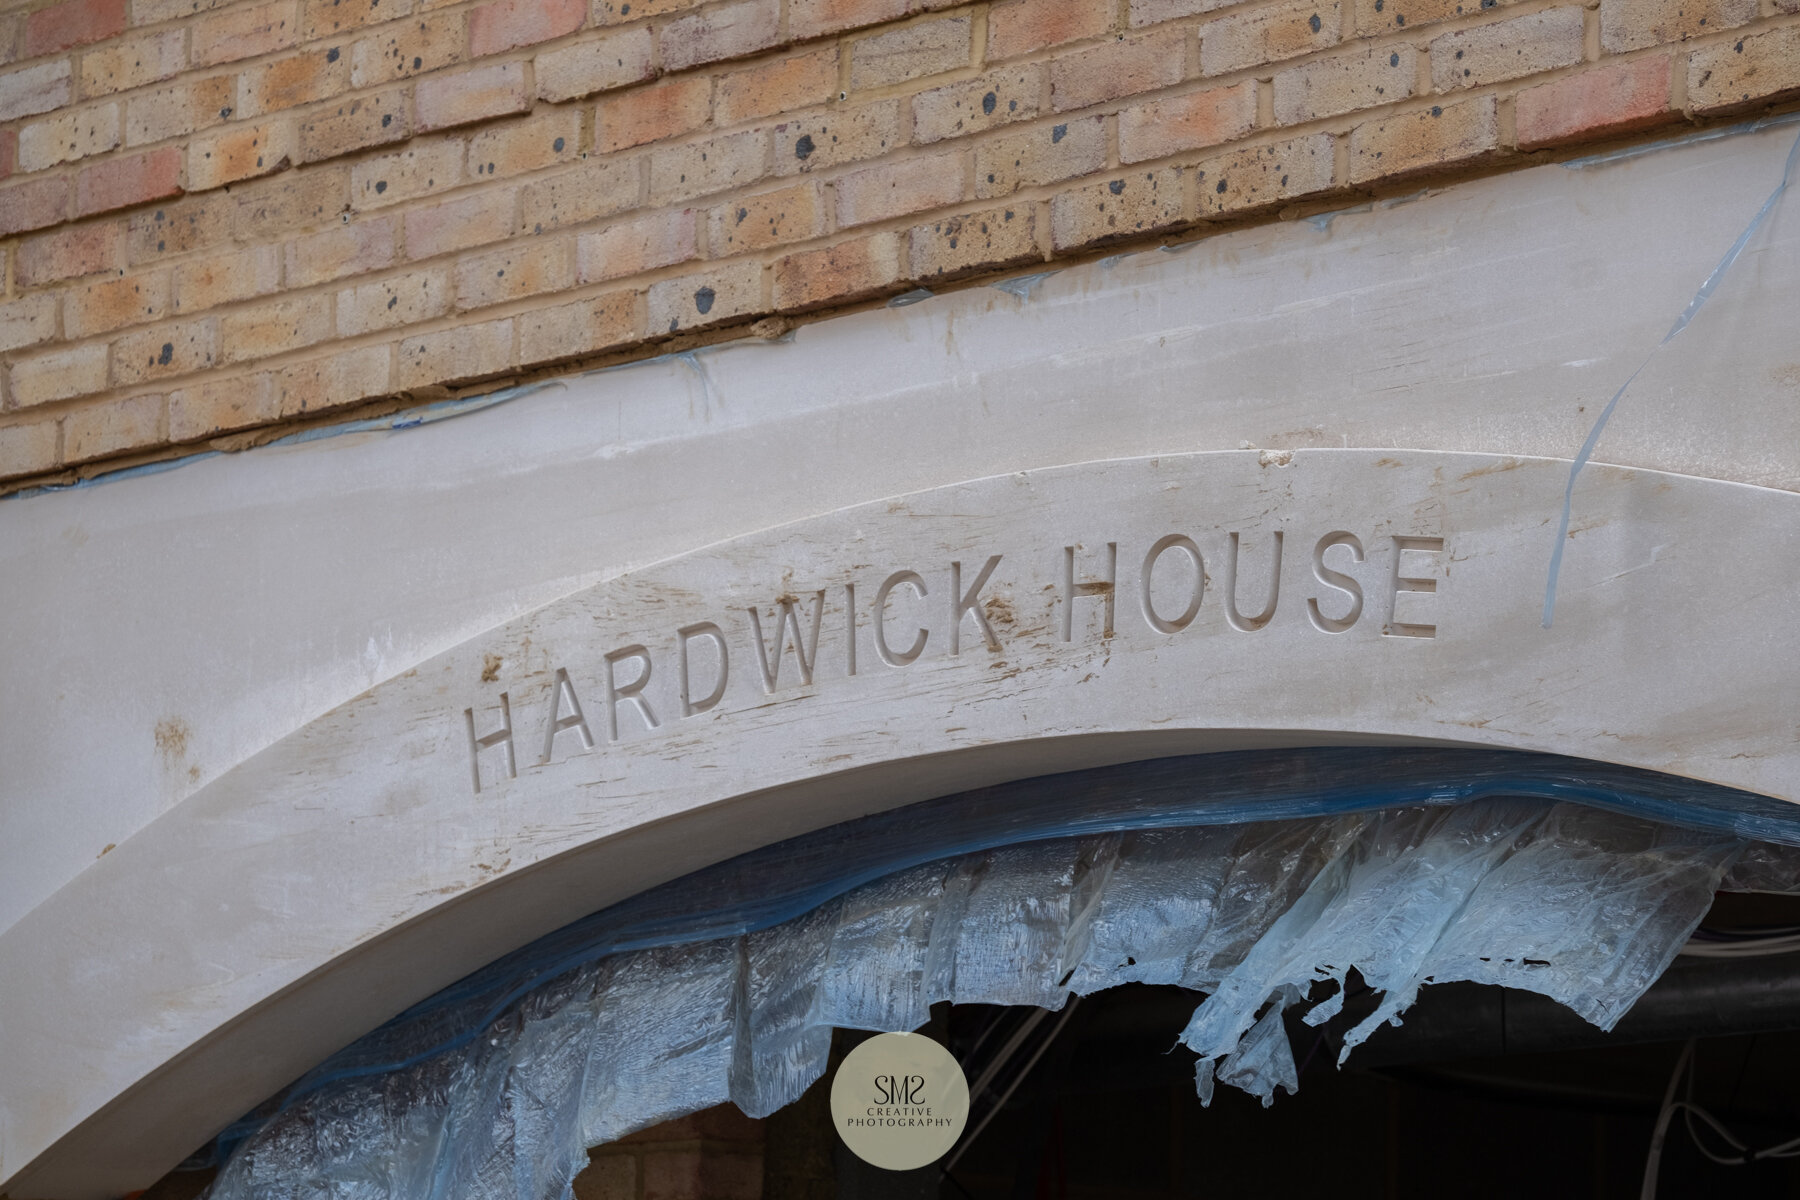  Hardwick House the sign over the entrance to Block C. 